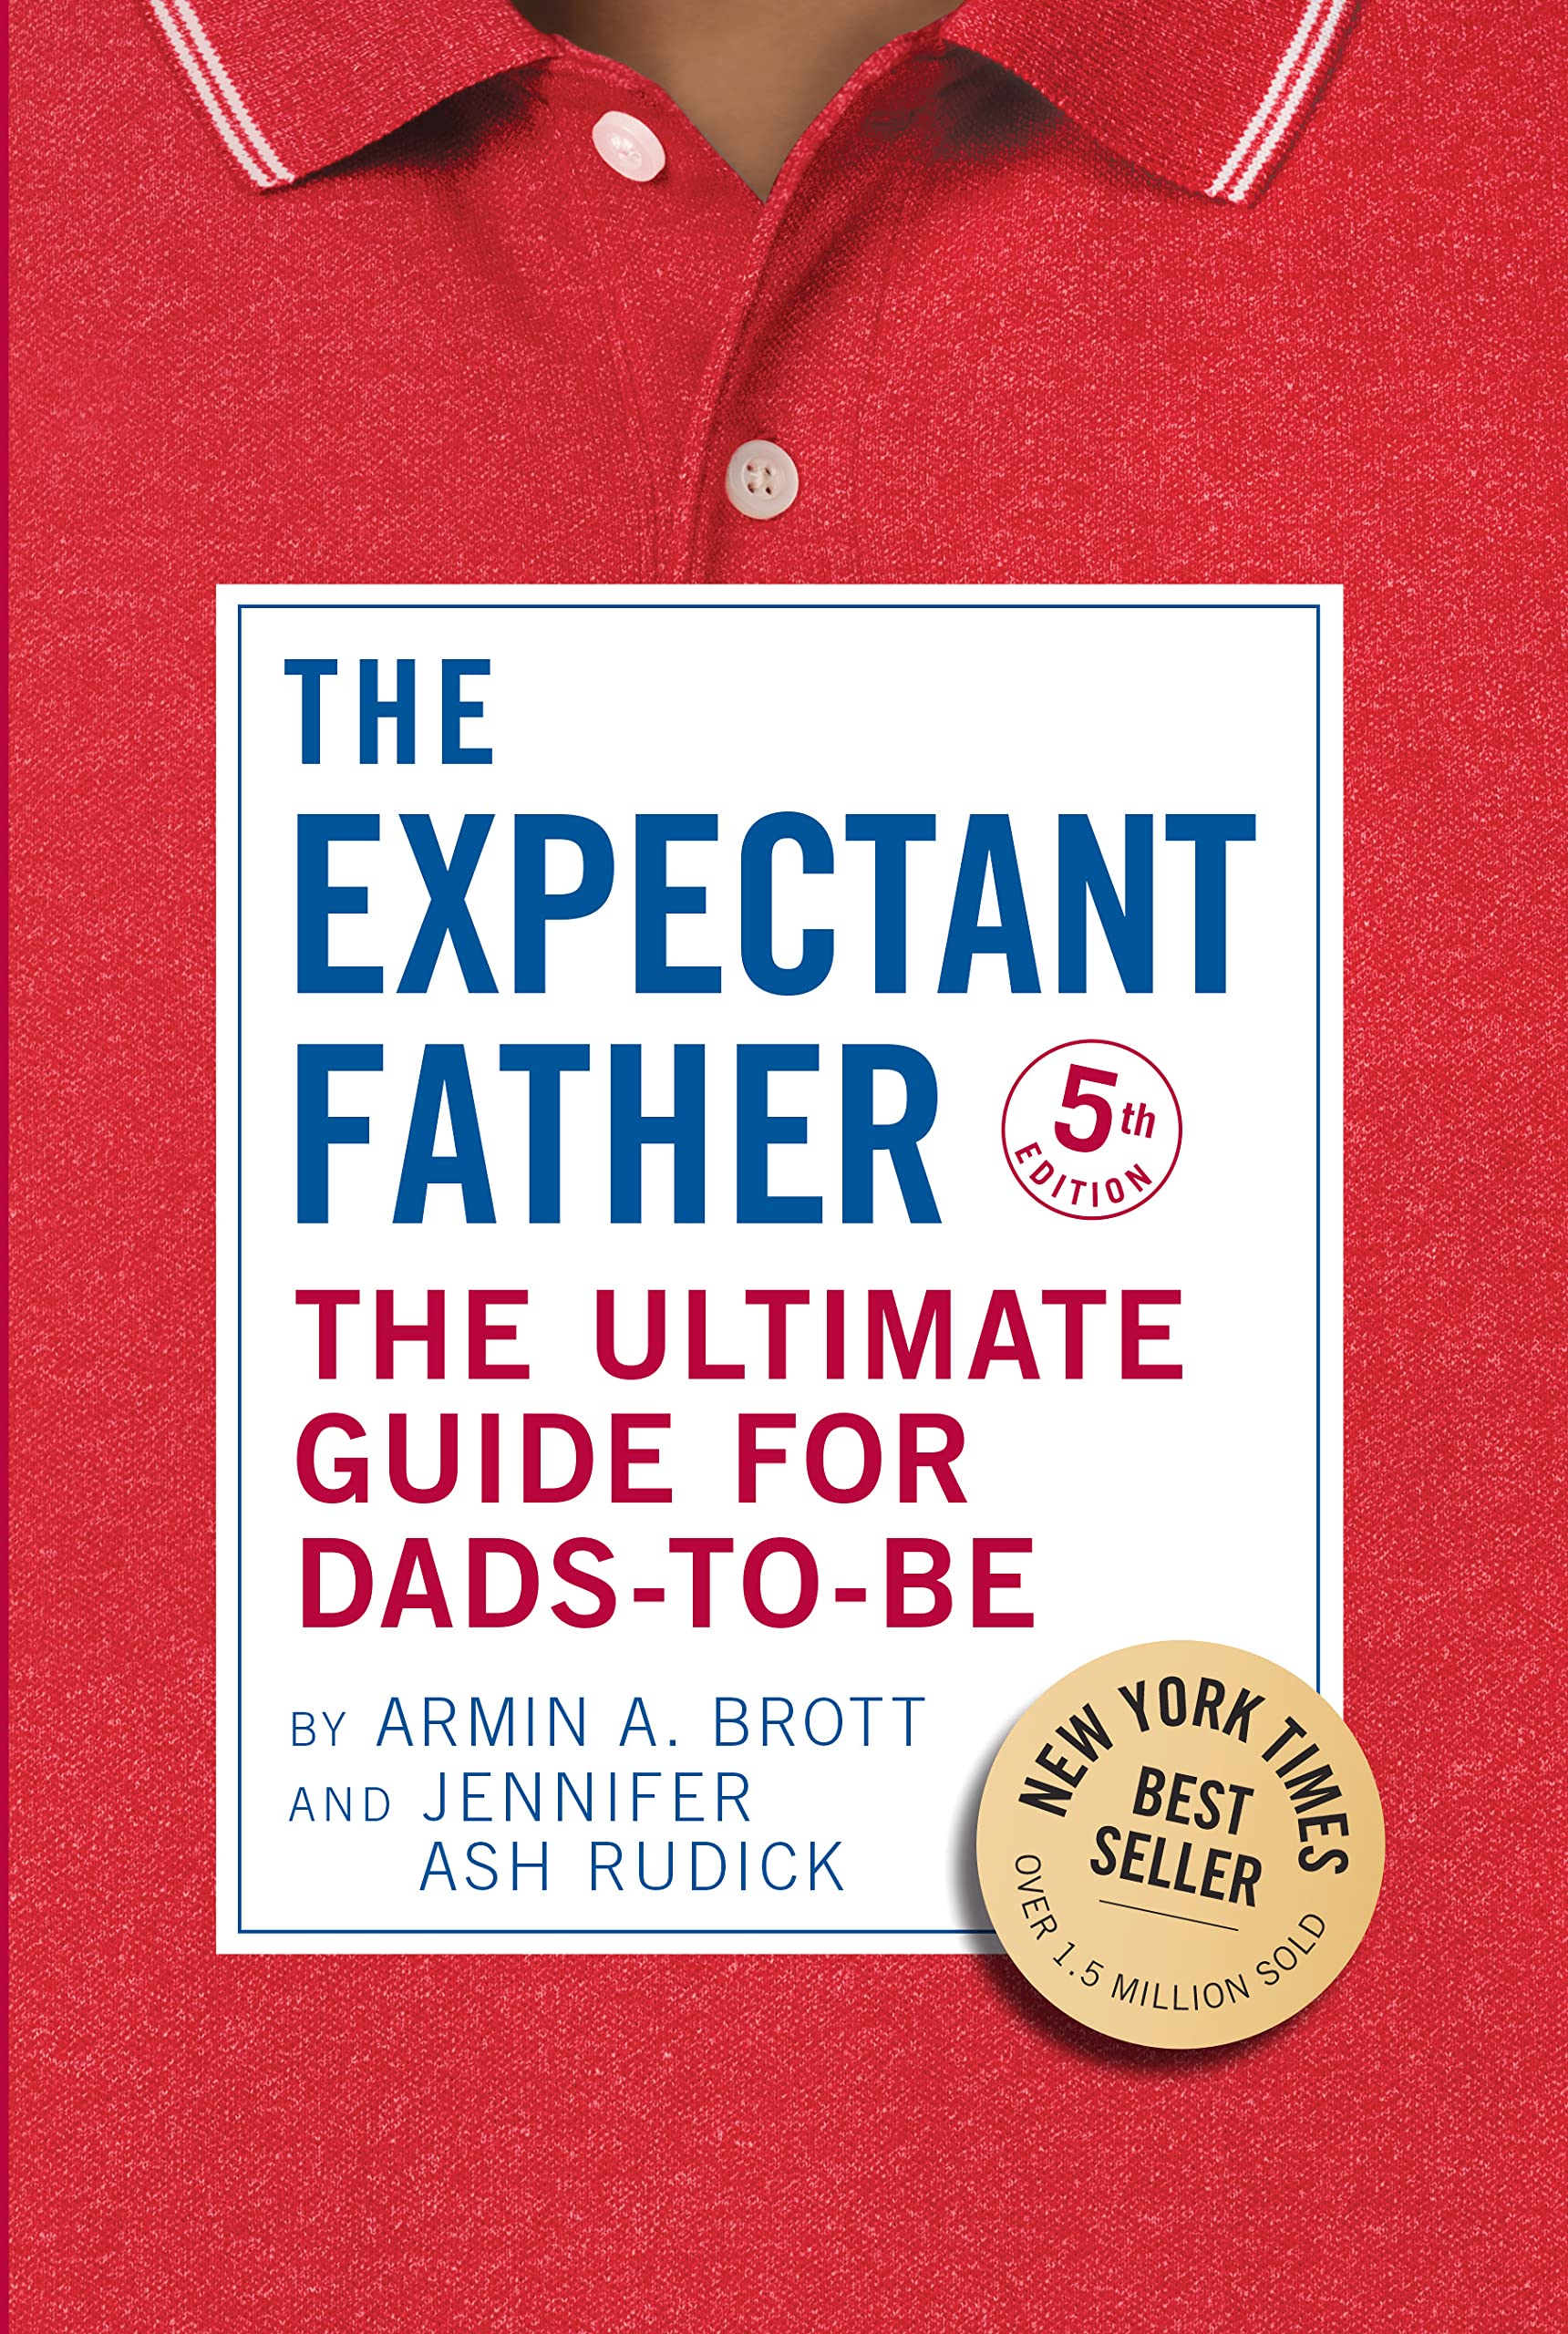 The Expectant Father: The Ultimate Guide for Dads-To-Be by Brott, Armin A.